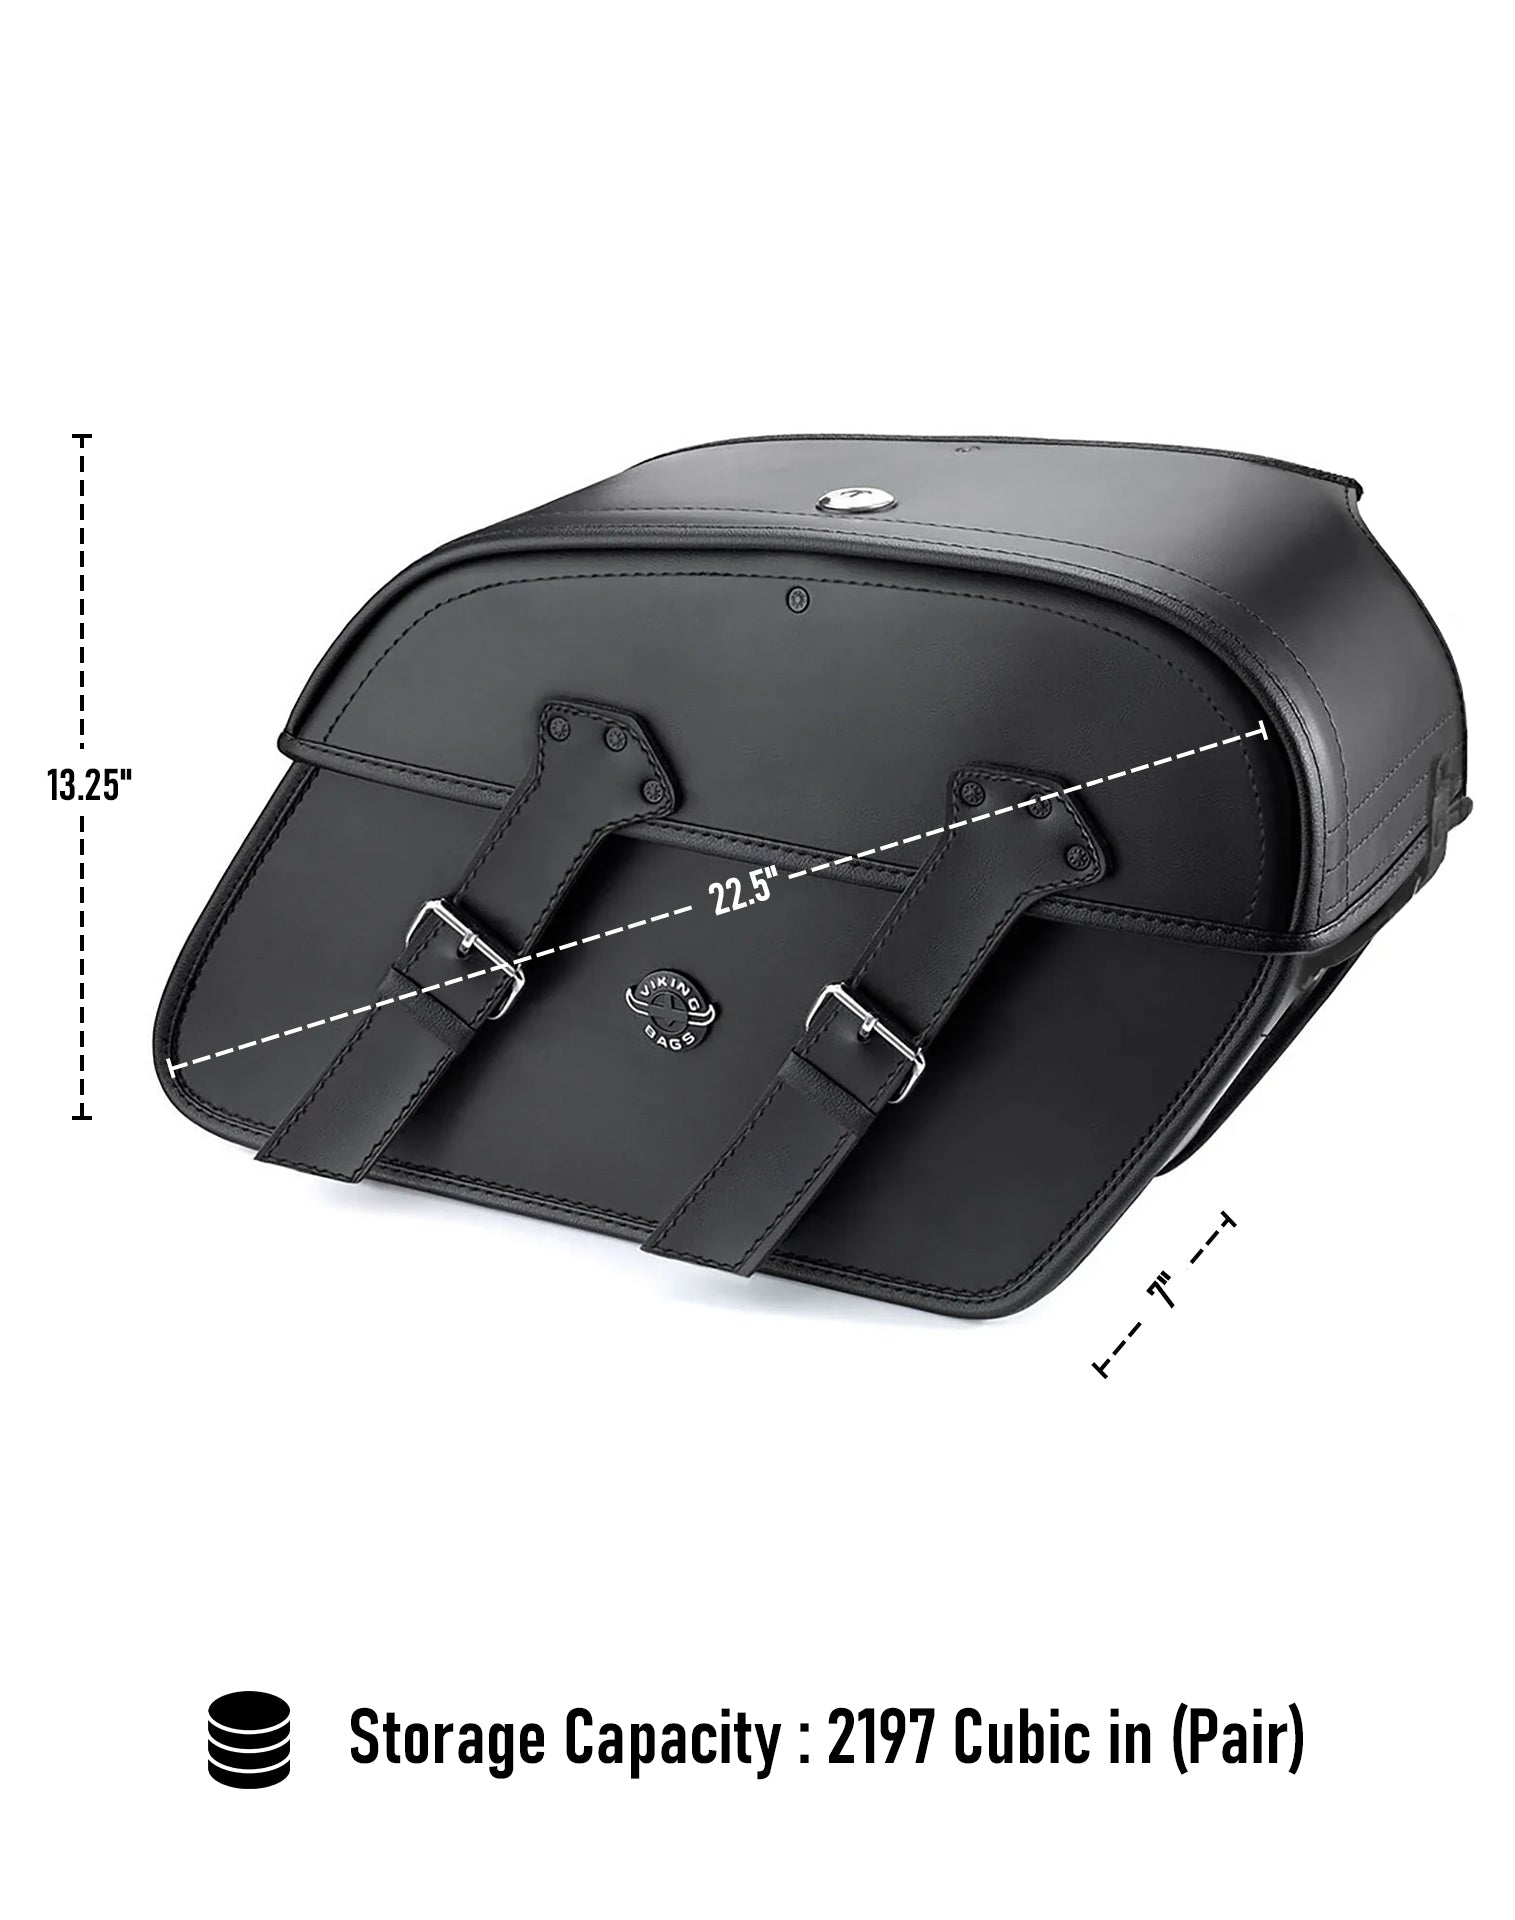 Viking Raven Extra Large Shock Cut Out Leather Motorcycle Saddlebags For Harley Street 750 Can Store Your Ridings Gears